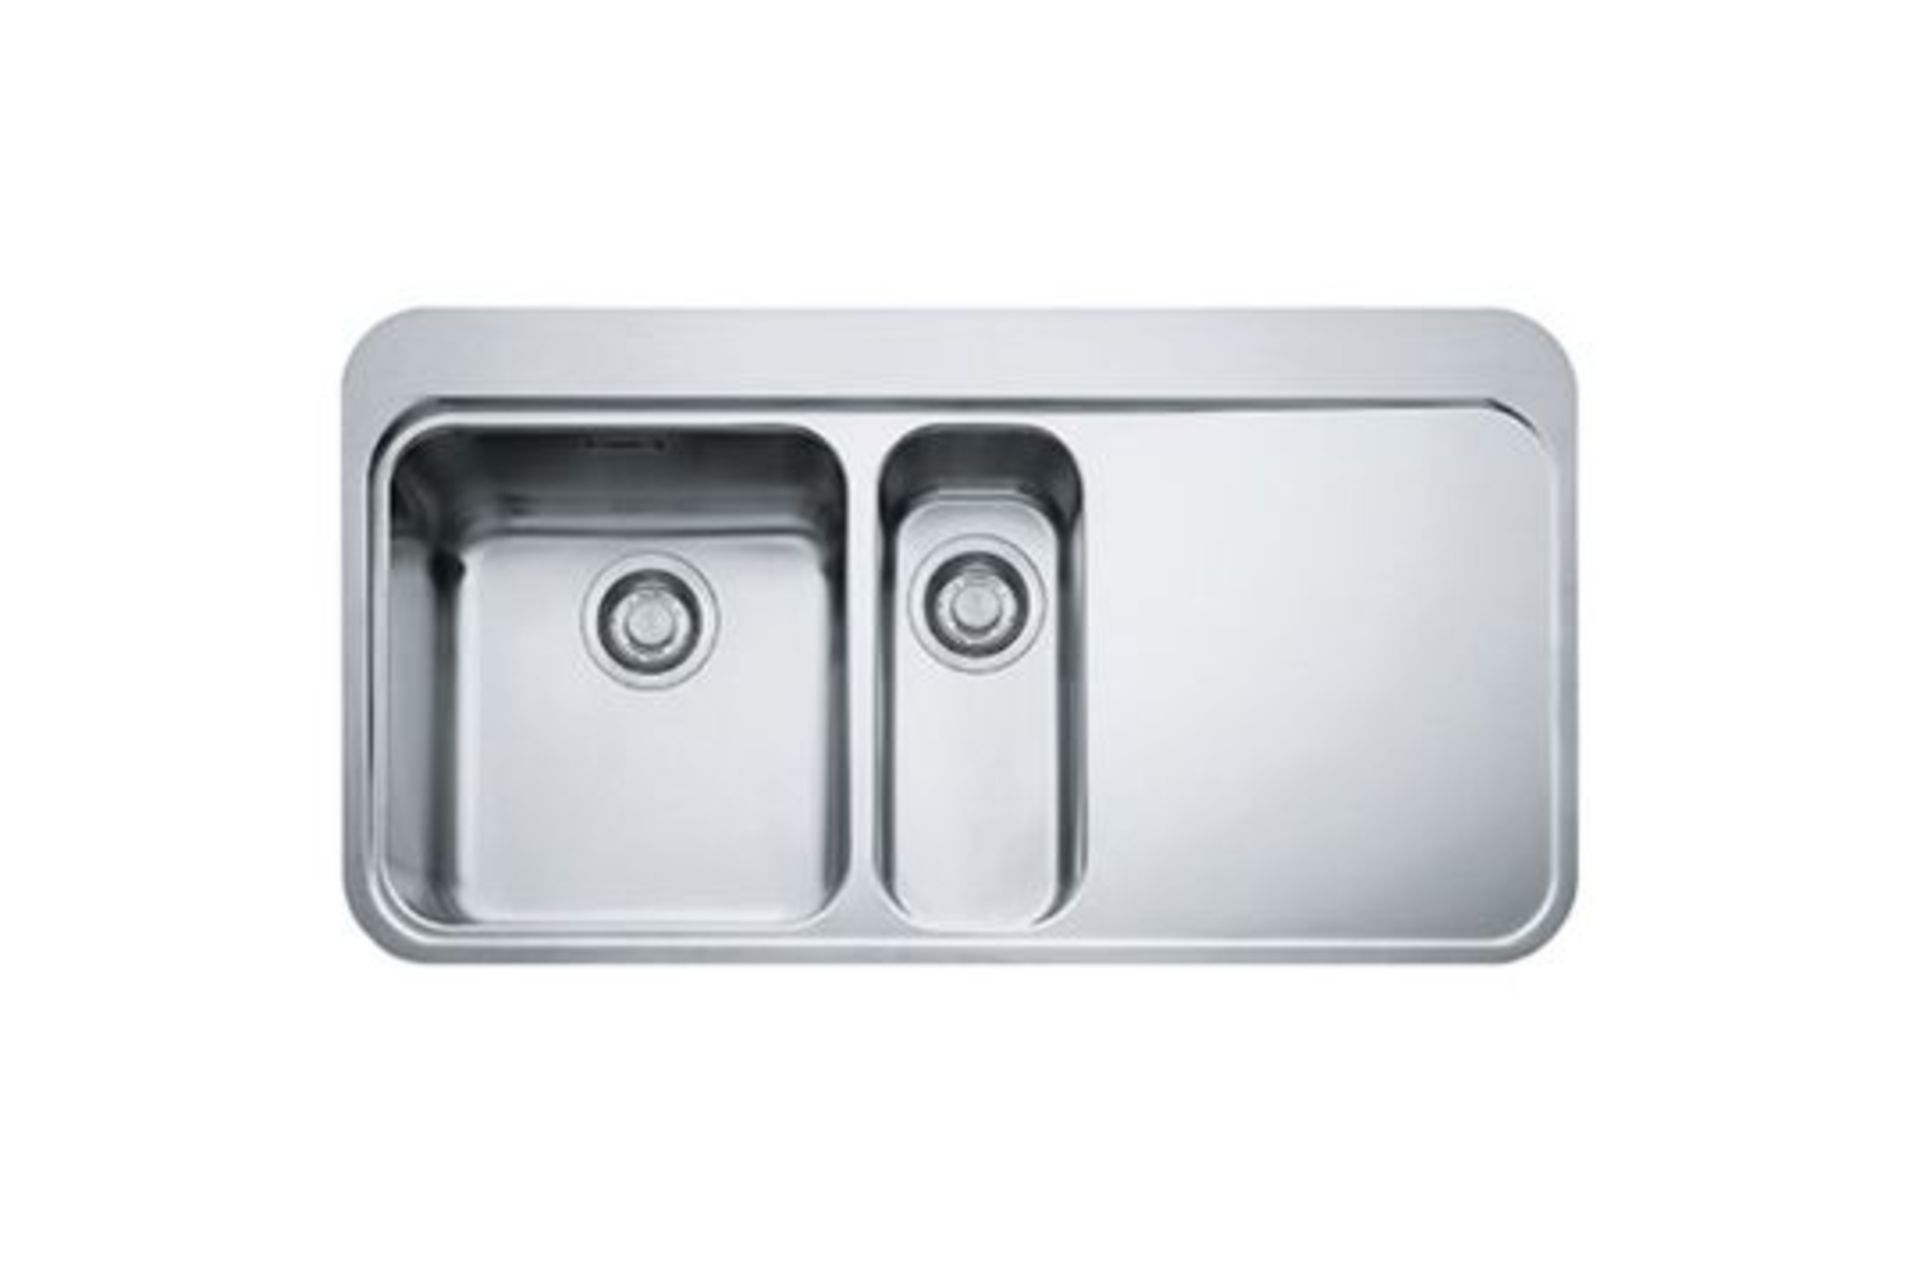 Boxed Brand New Factory Sealed Franke Sink- Model- SNX 251 965x510mm, RRP-£450.00